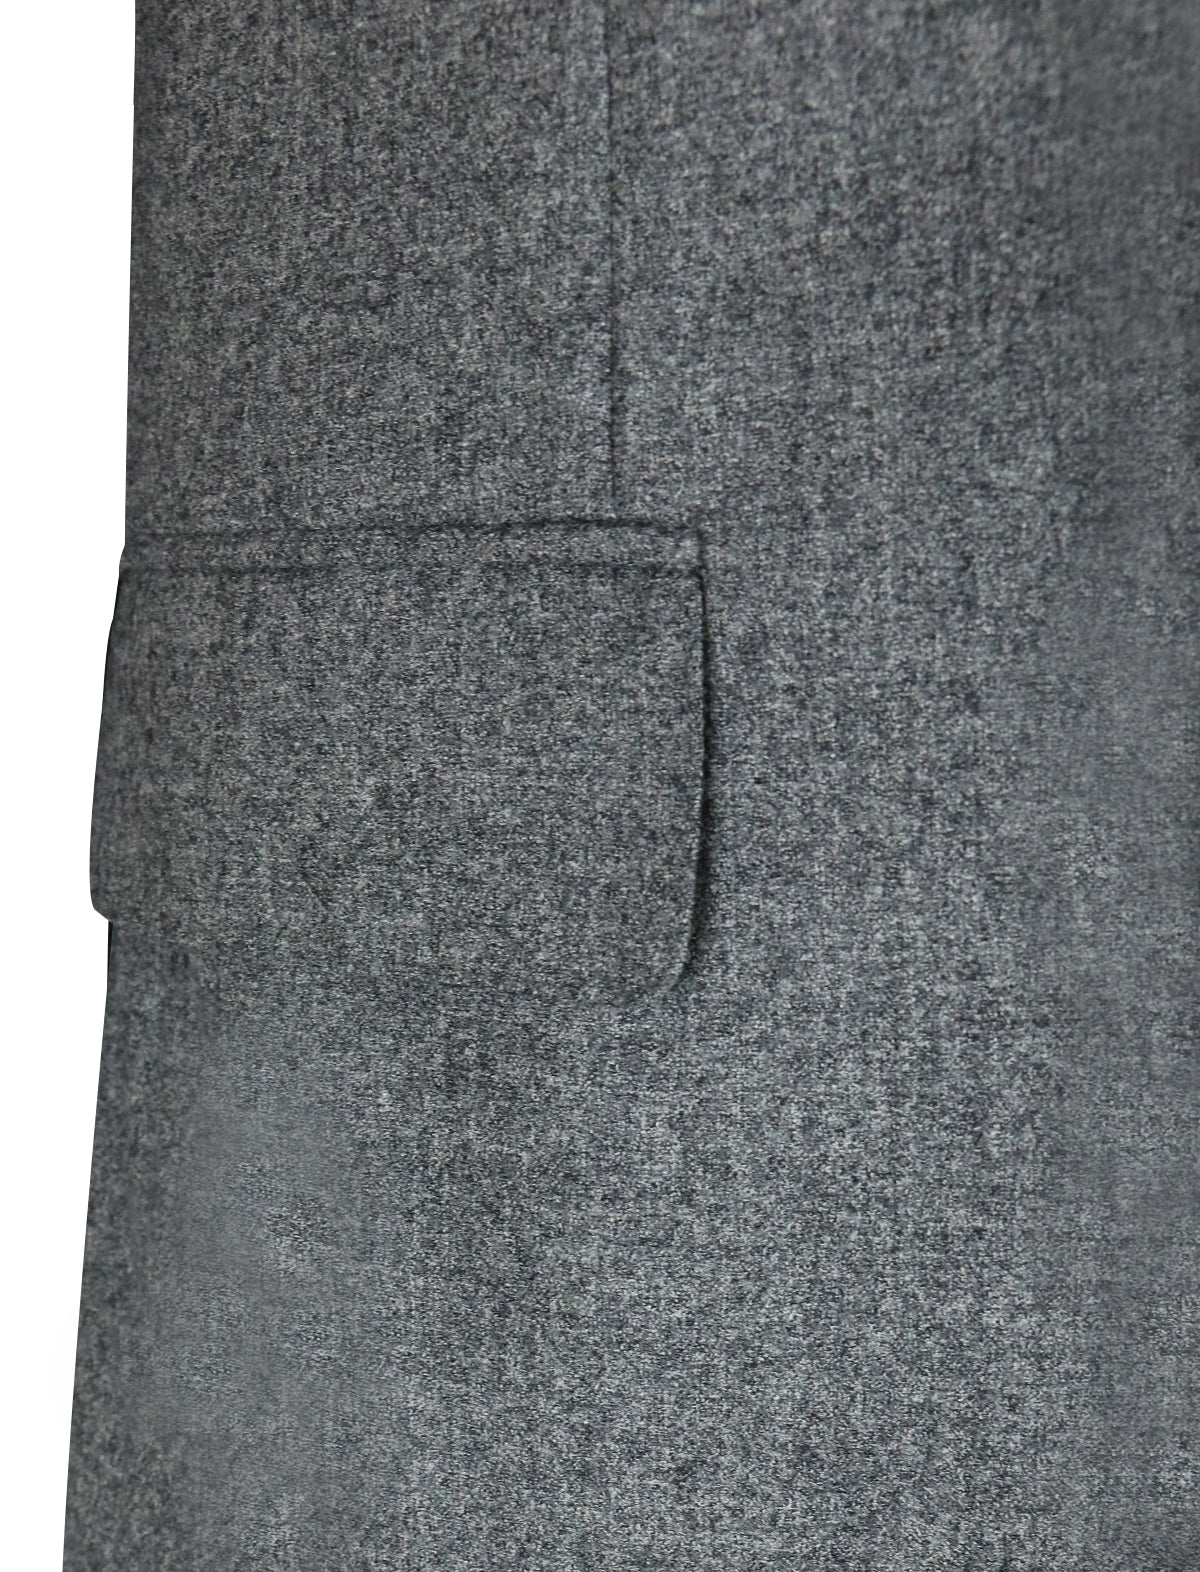 CARUSO Single-Breasted Aida Wool Suit Set in Grey